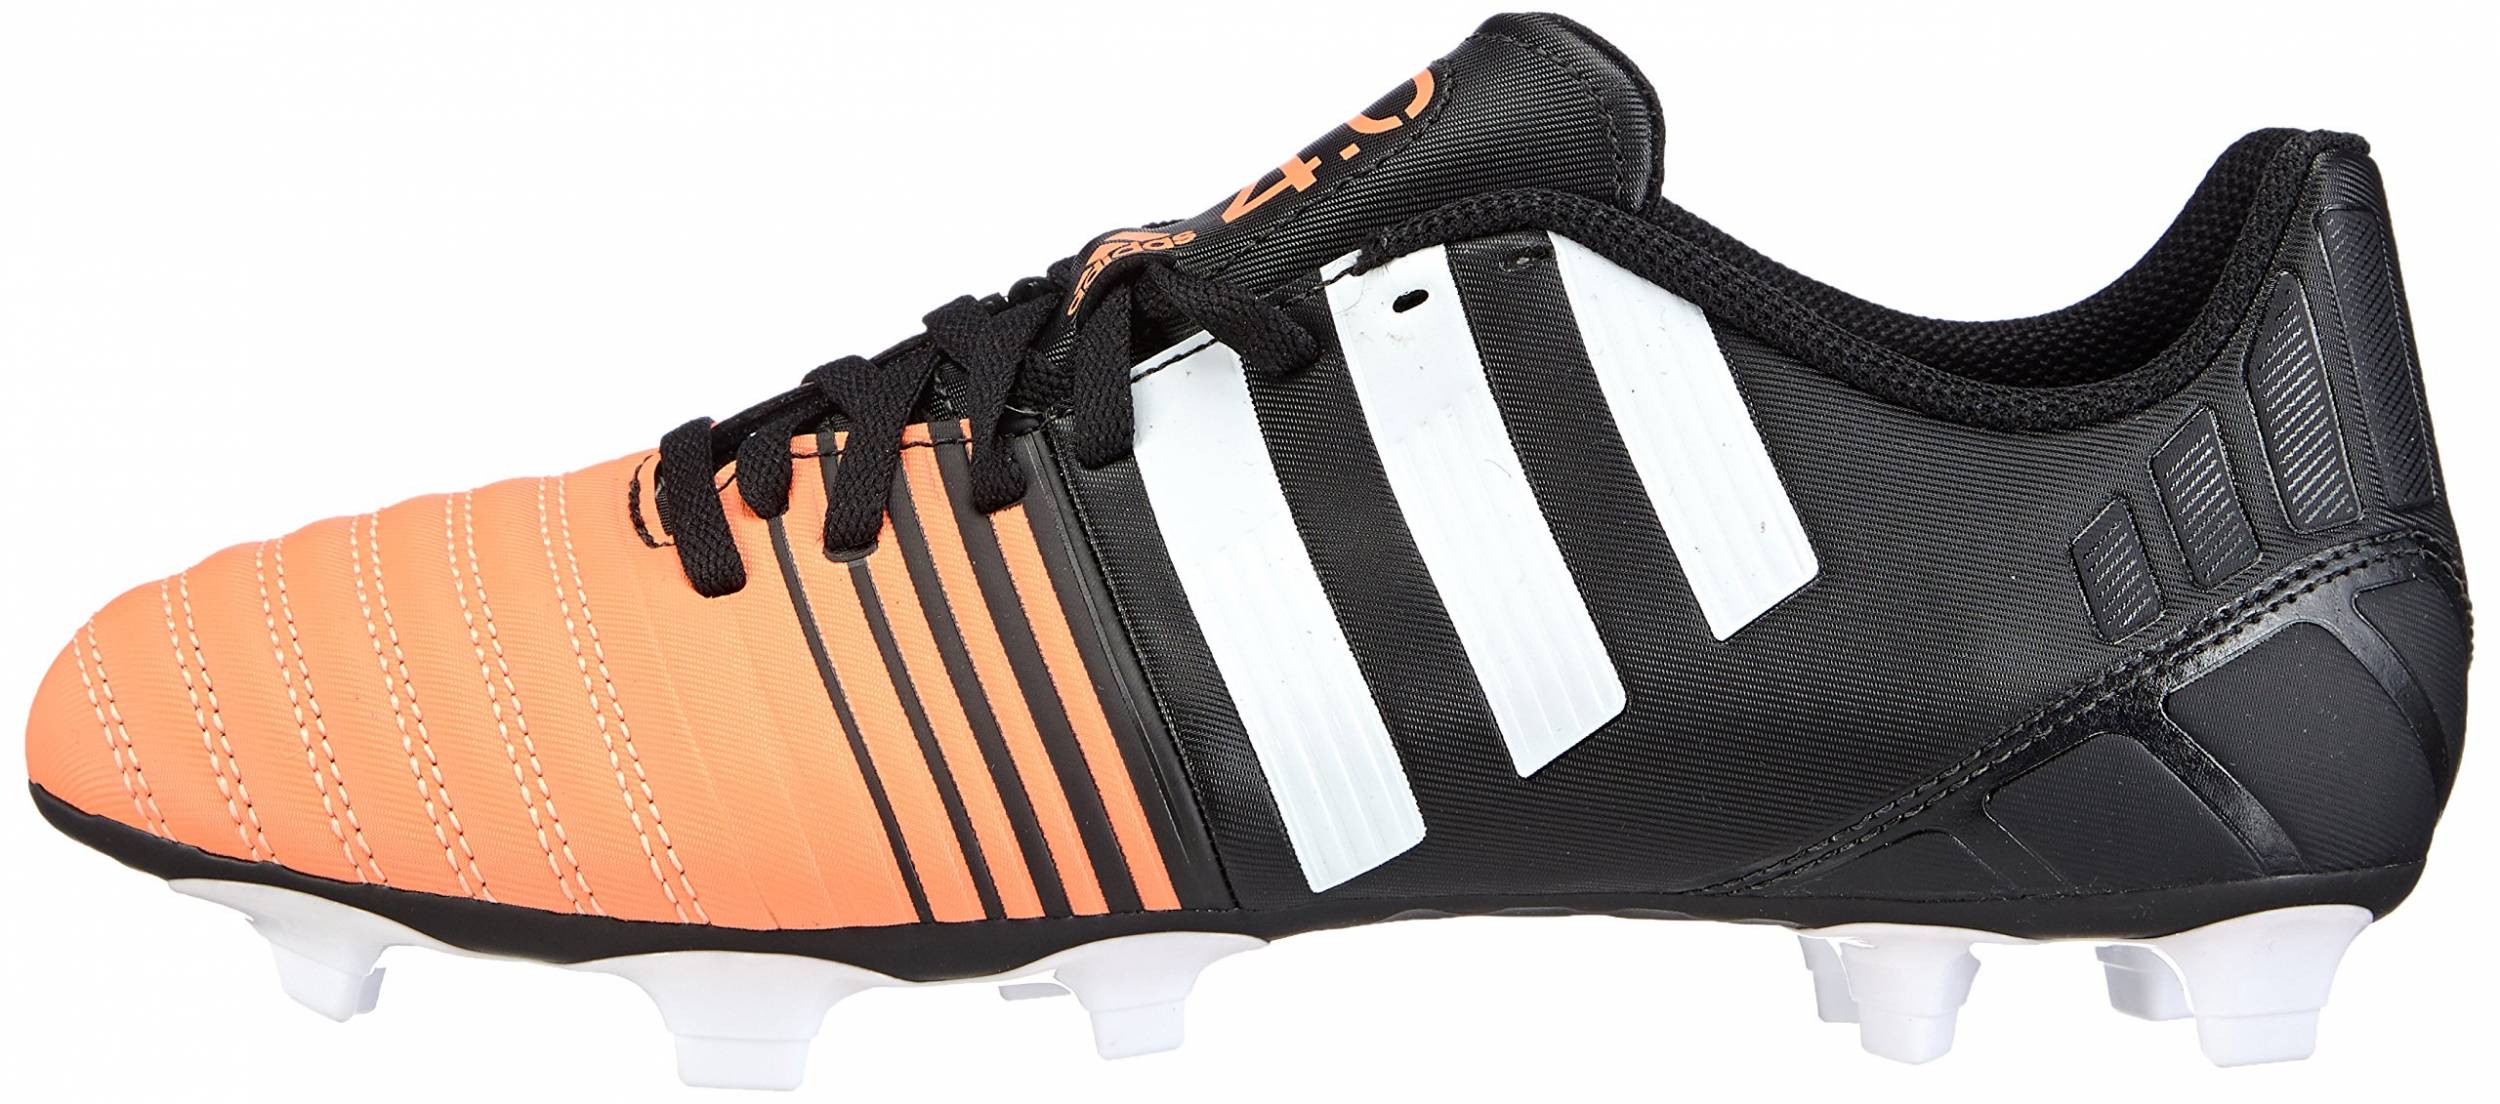 11 Reasons to/NOT to Buy Adidas Nitrocharge 4.0 Firm Ground (Dec 2020) |  RunRepeat